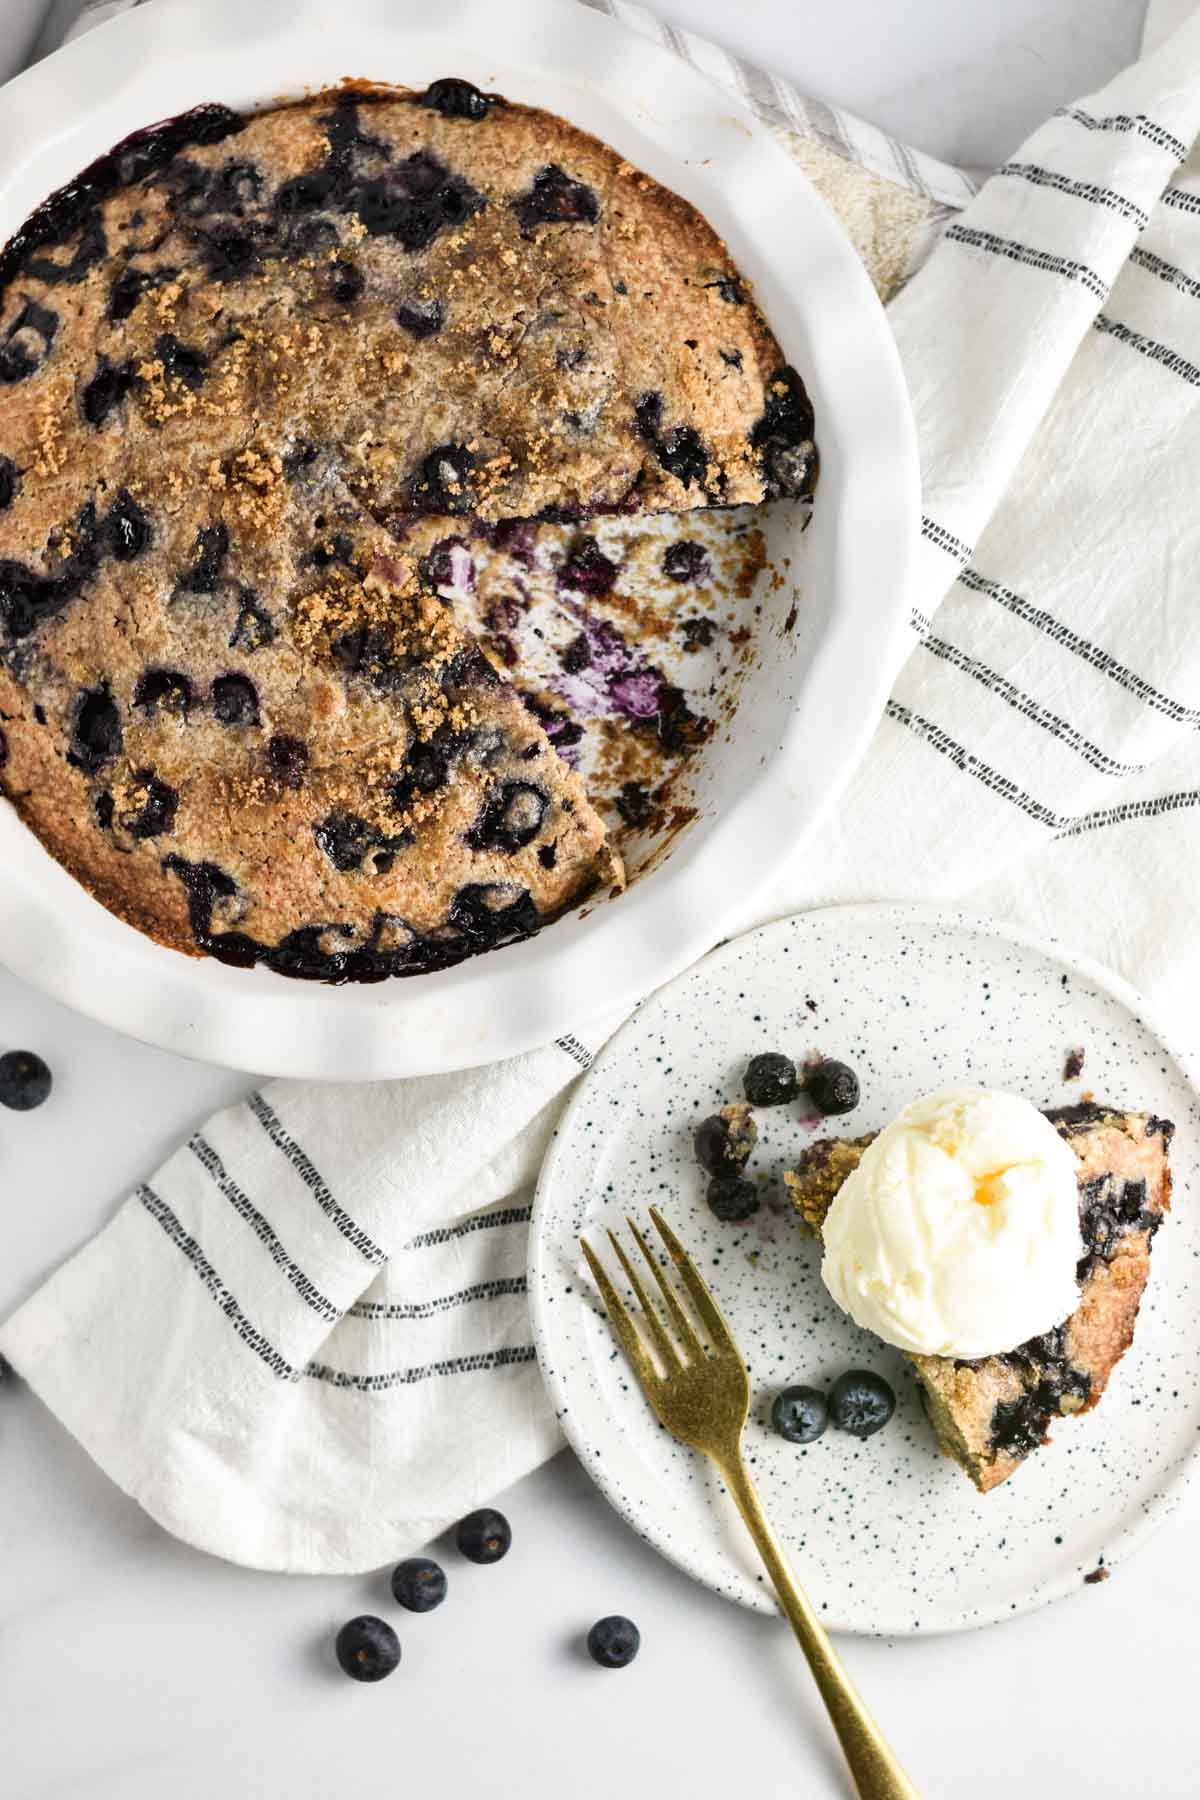 A slice of blueberry pie without crust next to a whole pie dish.